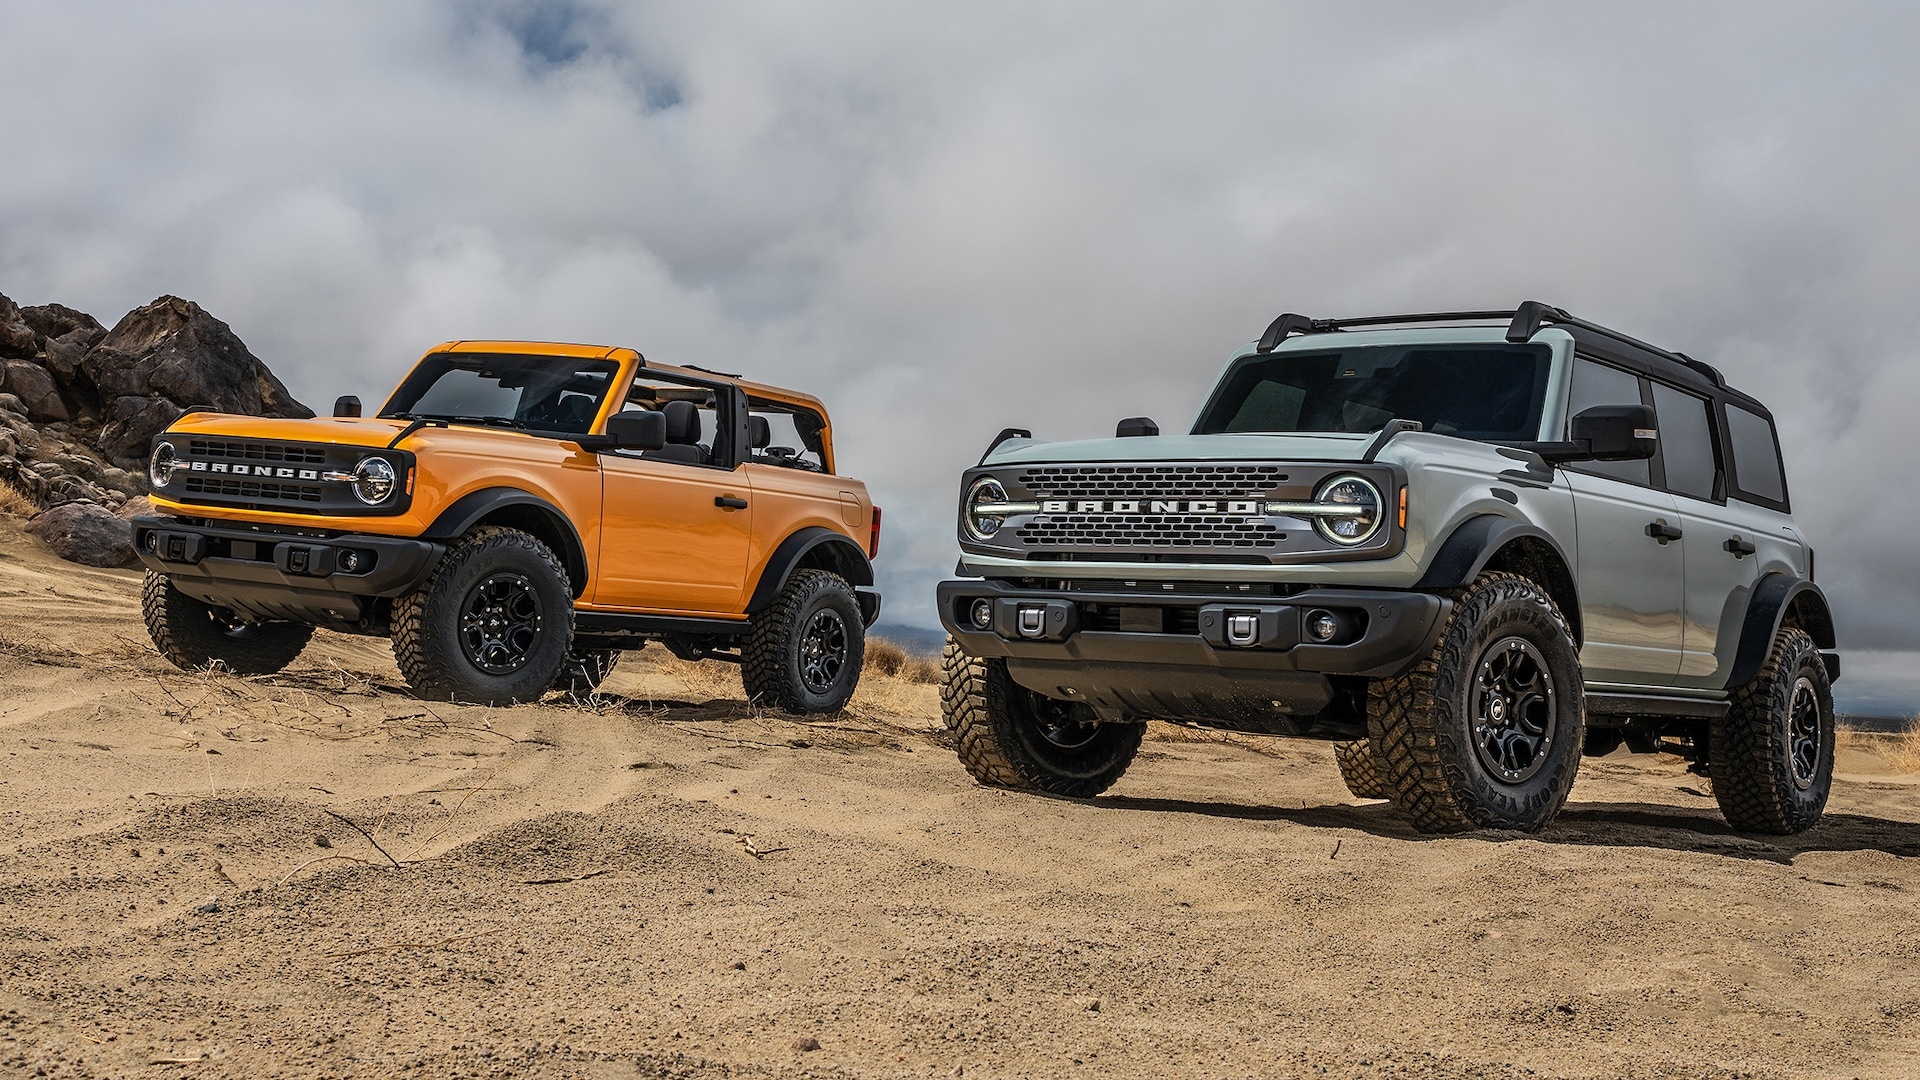 Ford Bronco: Serious Сompetitor For Both The Jeep And Harvester, New Models Of 2021, Safari-style Roof. 1920x1080 Full HD Background.